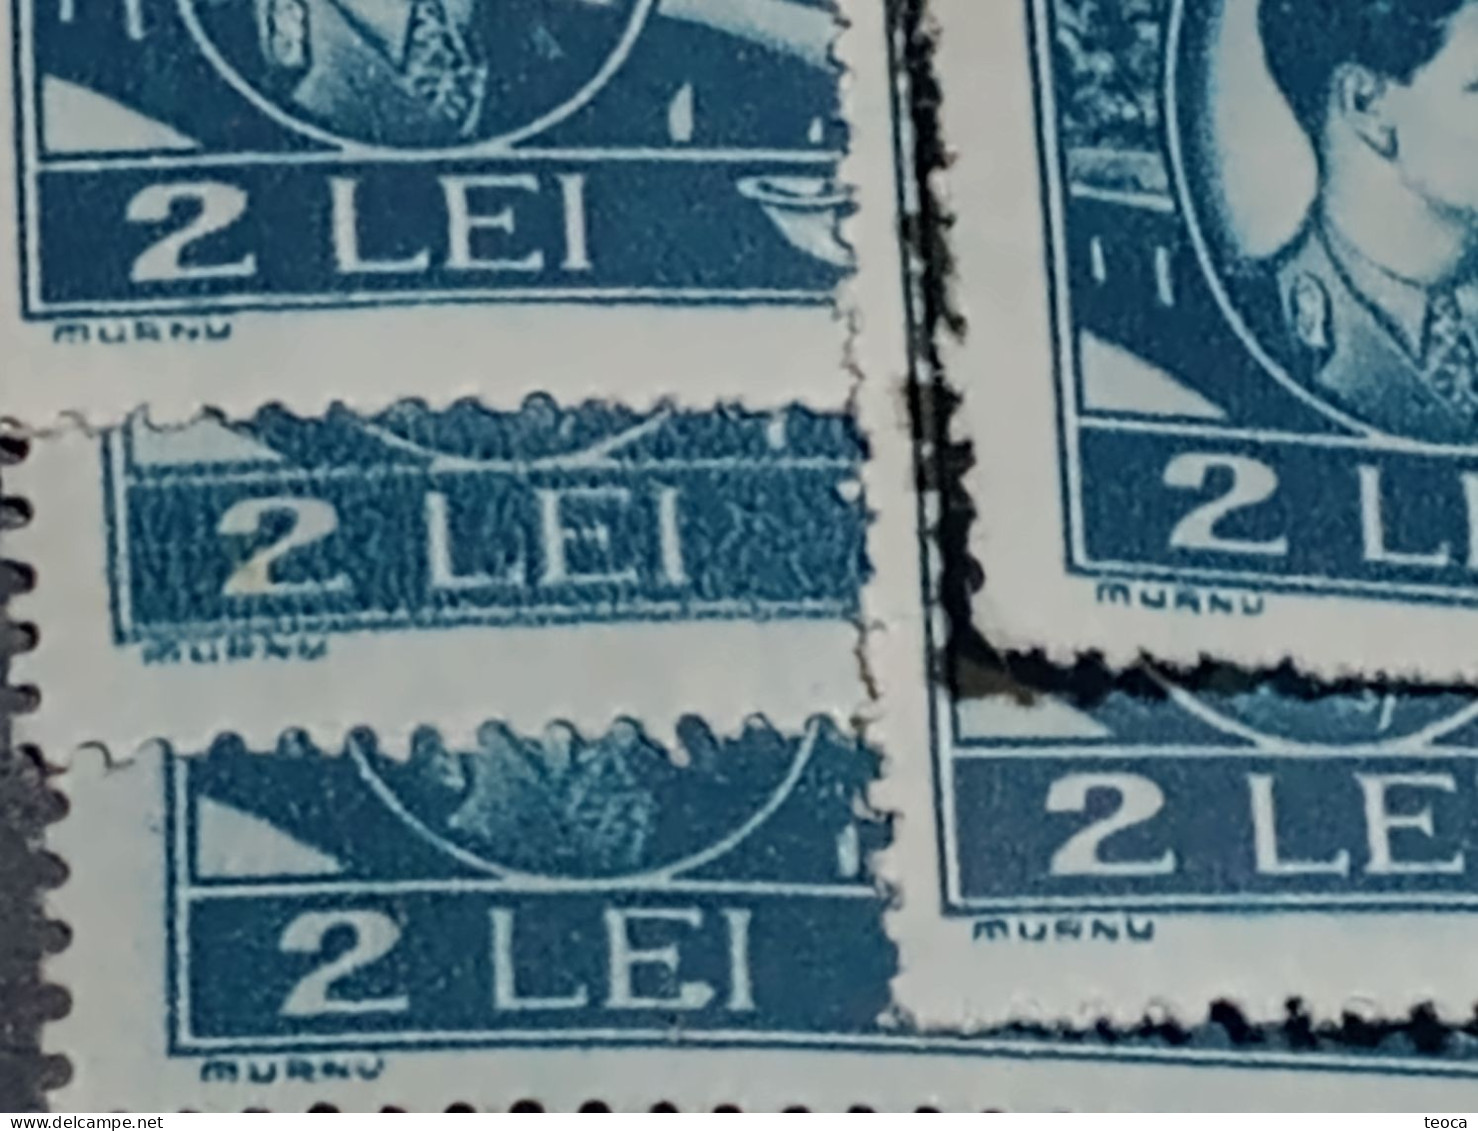 Stamps Errors Romania 1947 # Mi 1068 King Michael Printed With A Loop At The Letter "E" On LEI Unused - Ongebruikt